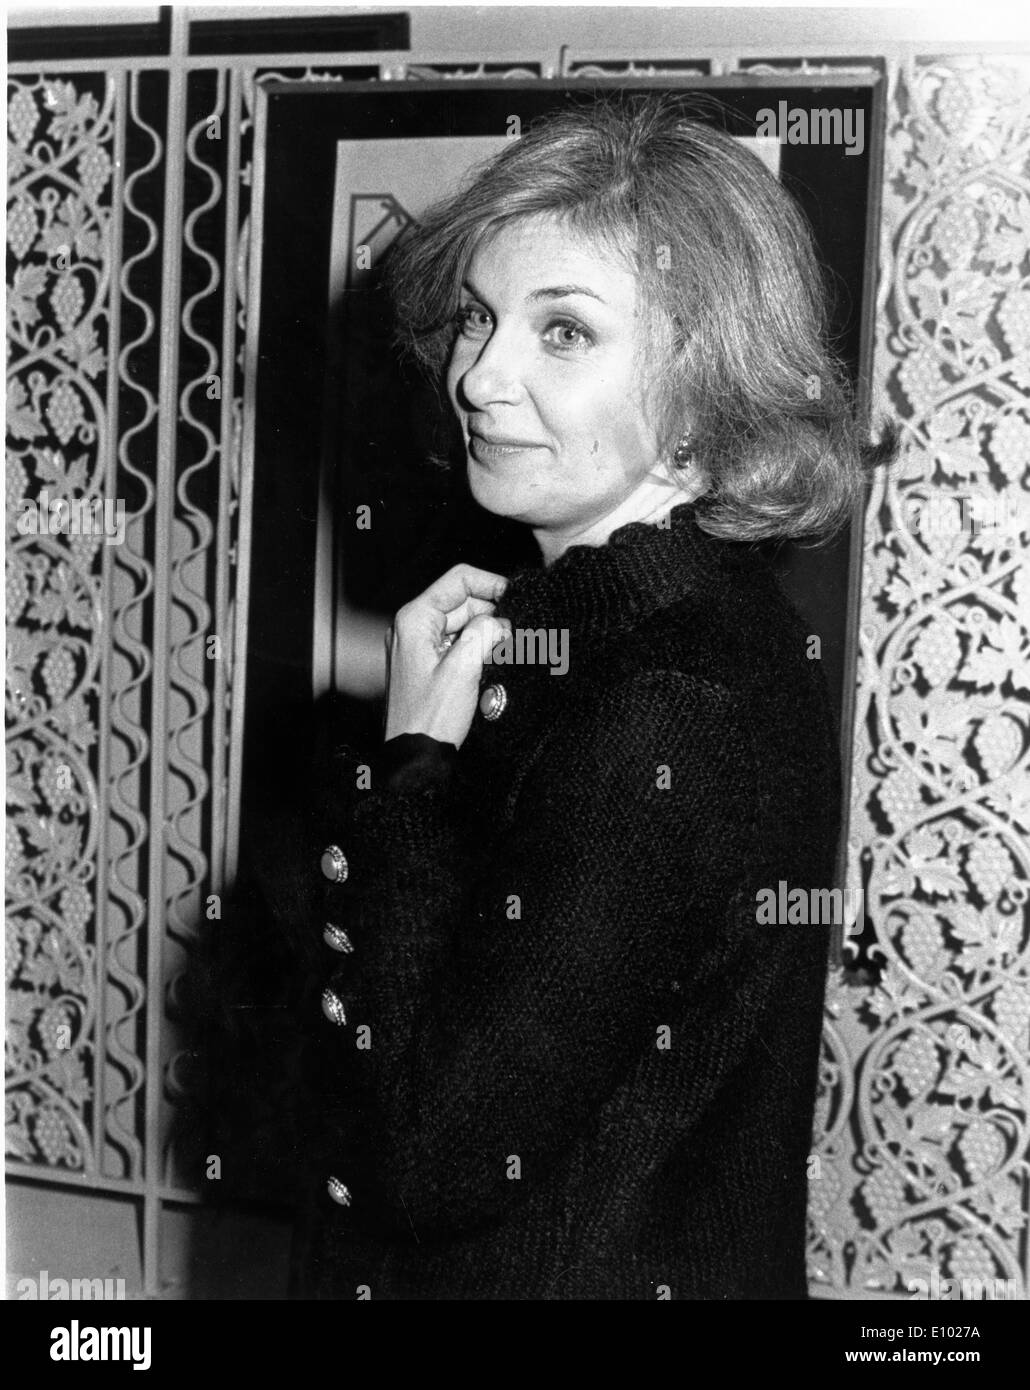 Actress Joanne Woodward at Blue Angel Lounge Stock Photo